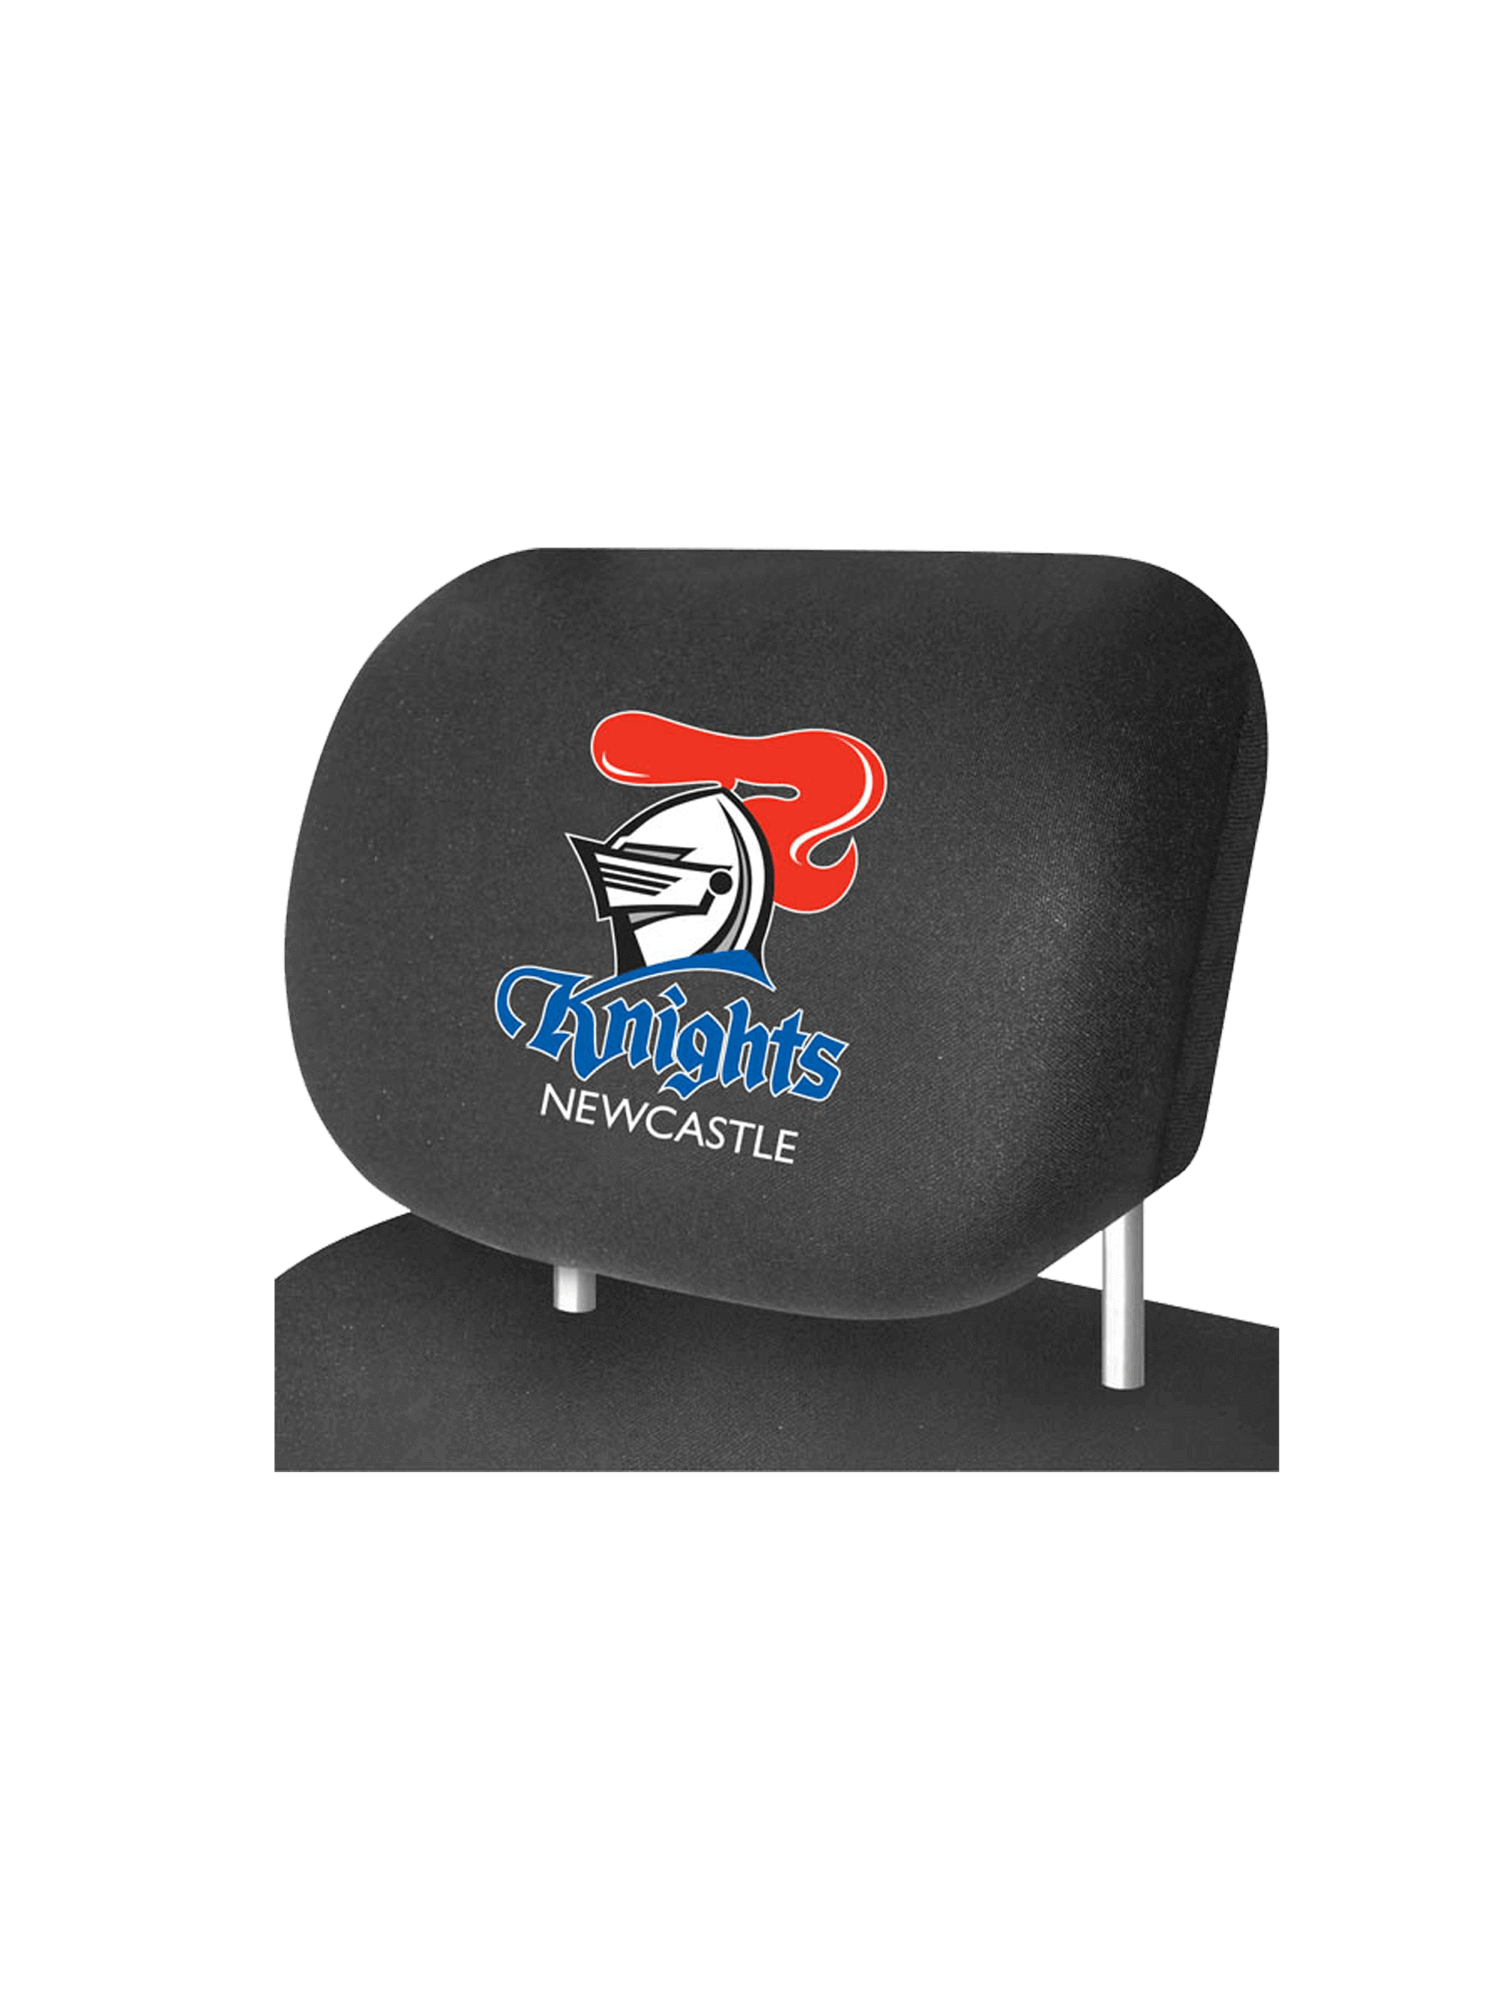 NEWCASTLE KNIGHTS OFFICIAL HEADREST COVER_NEWCASTLE KNIGHTS_STUBBY CLUB